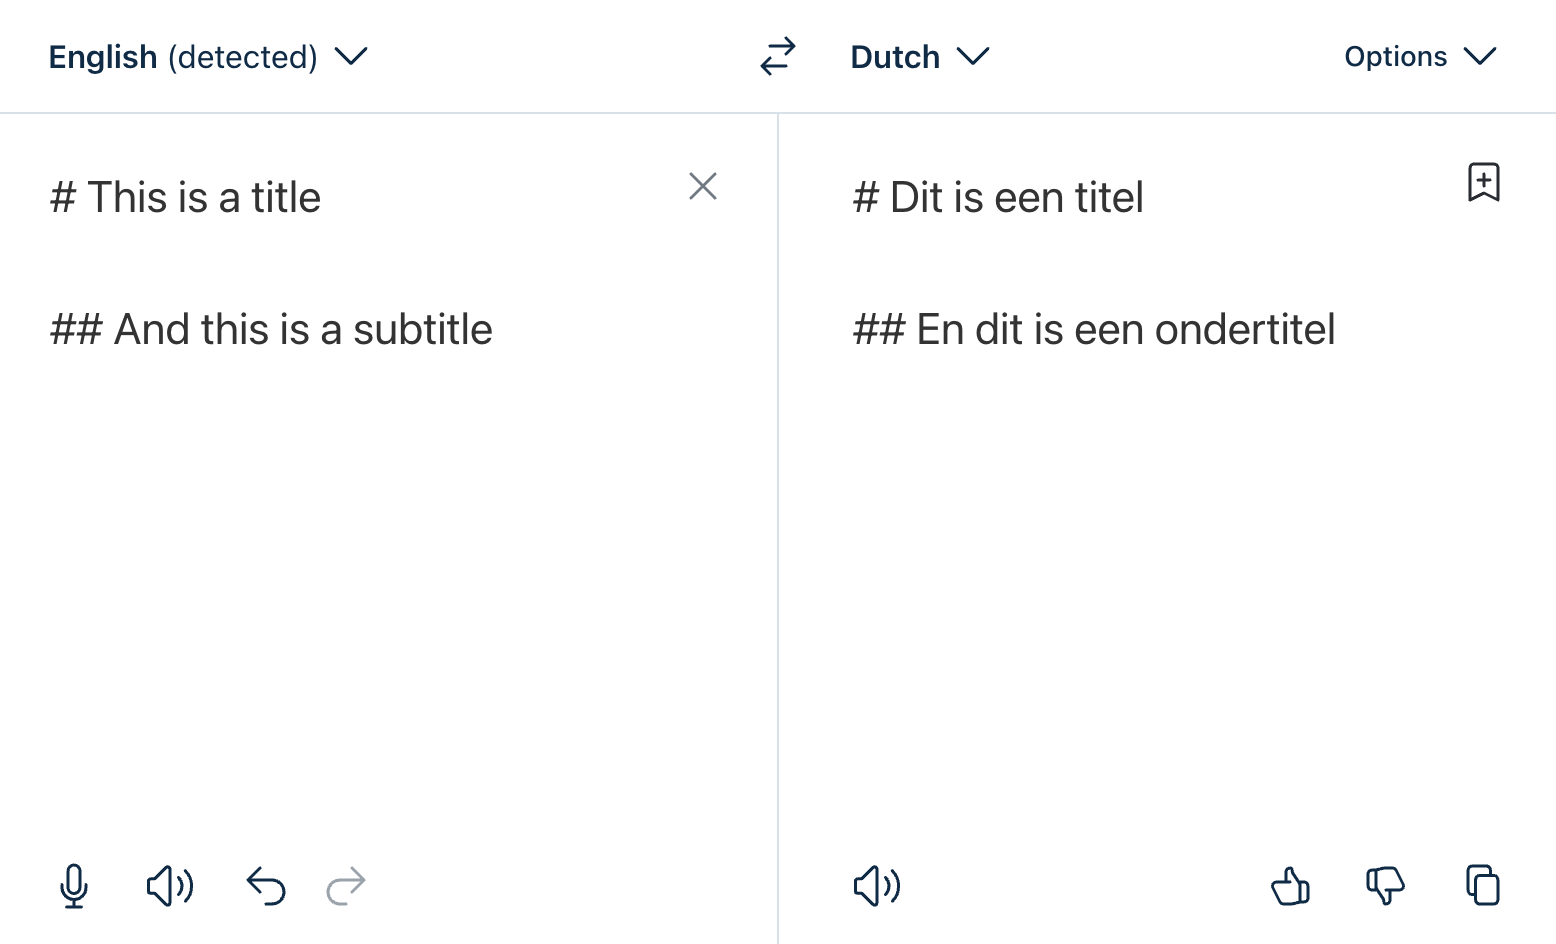 deepl translator example, we used markdown to translate the english text to dutch keeping the formatting